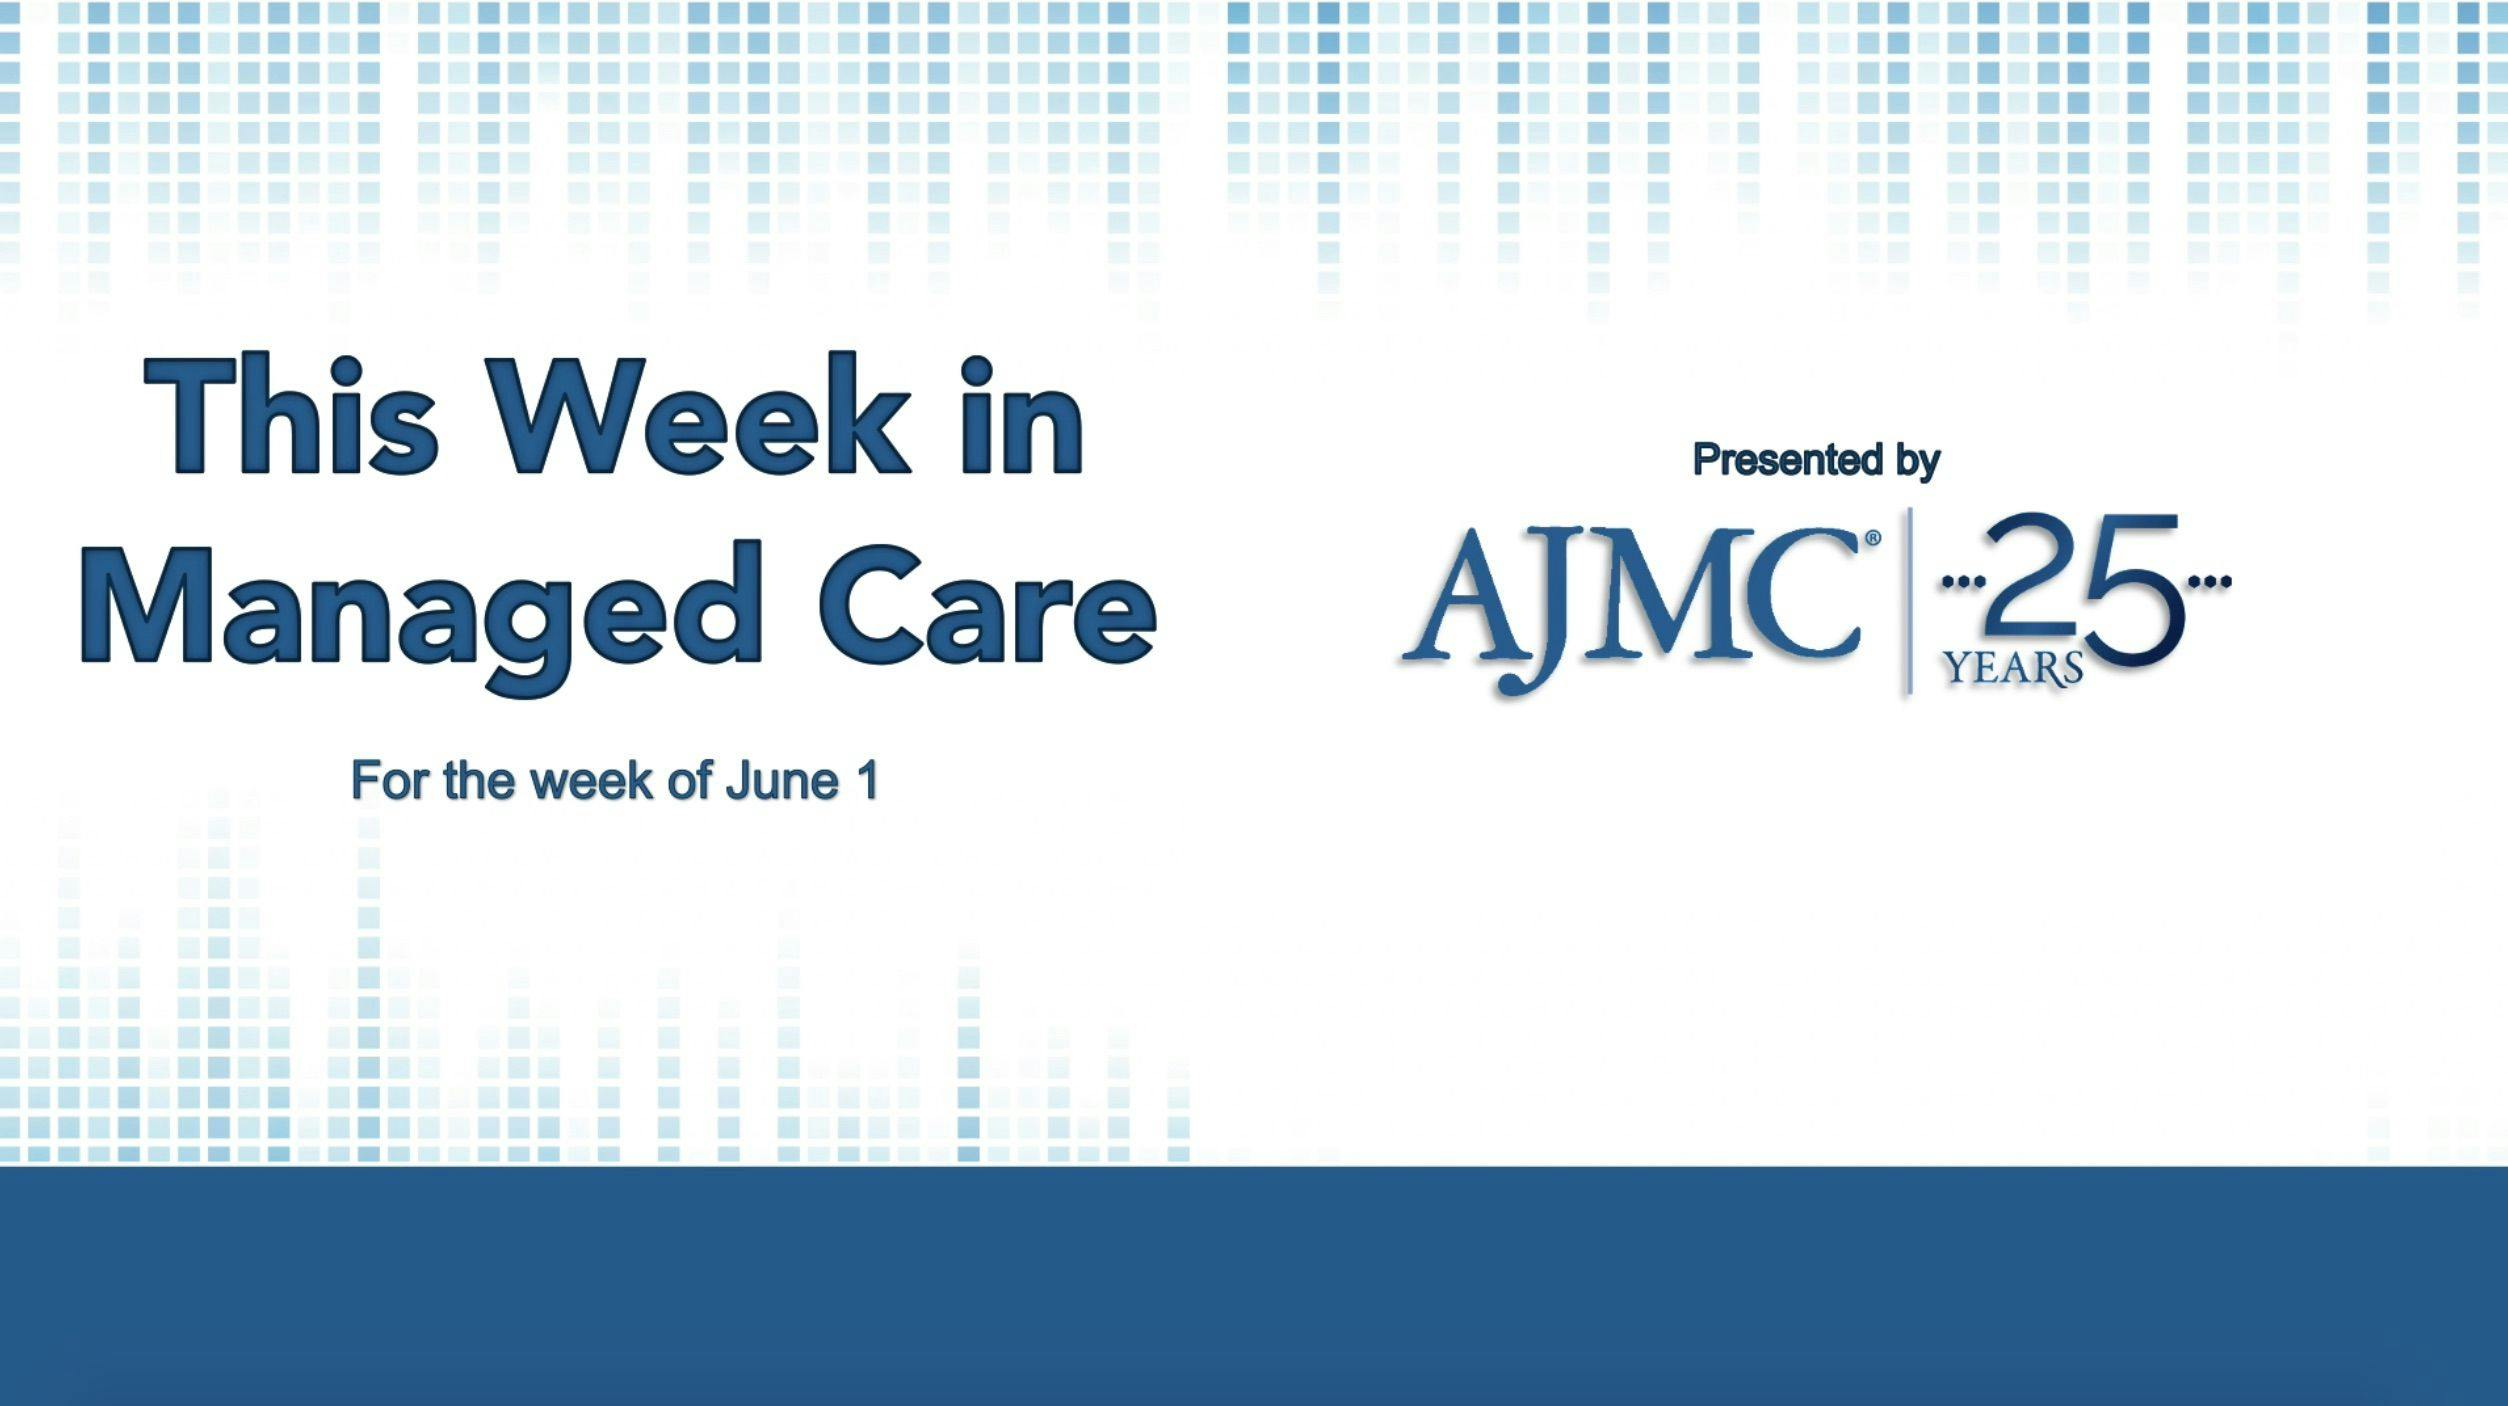 This Week in Managed Care: June 5, 2020